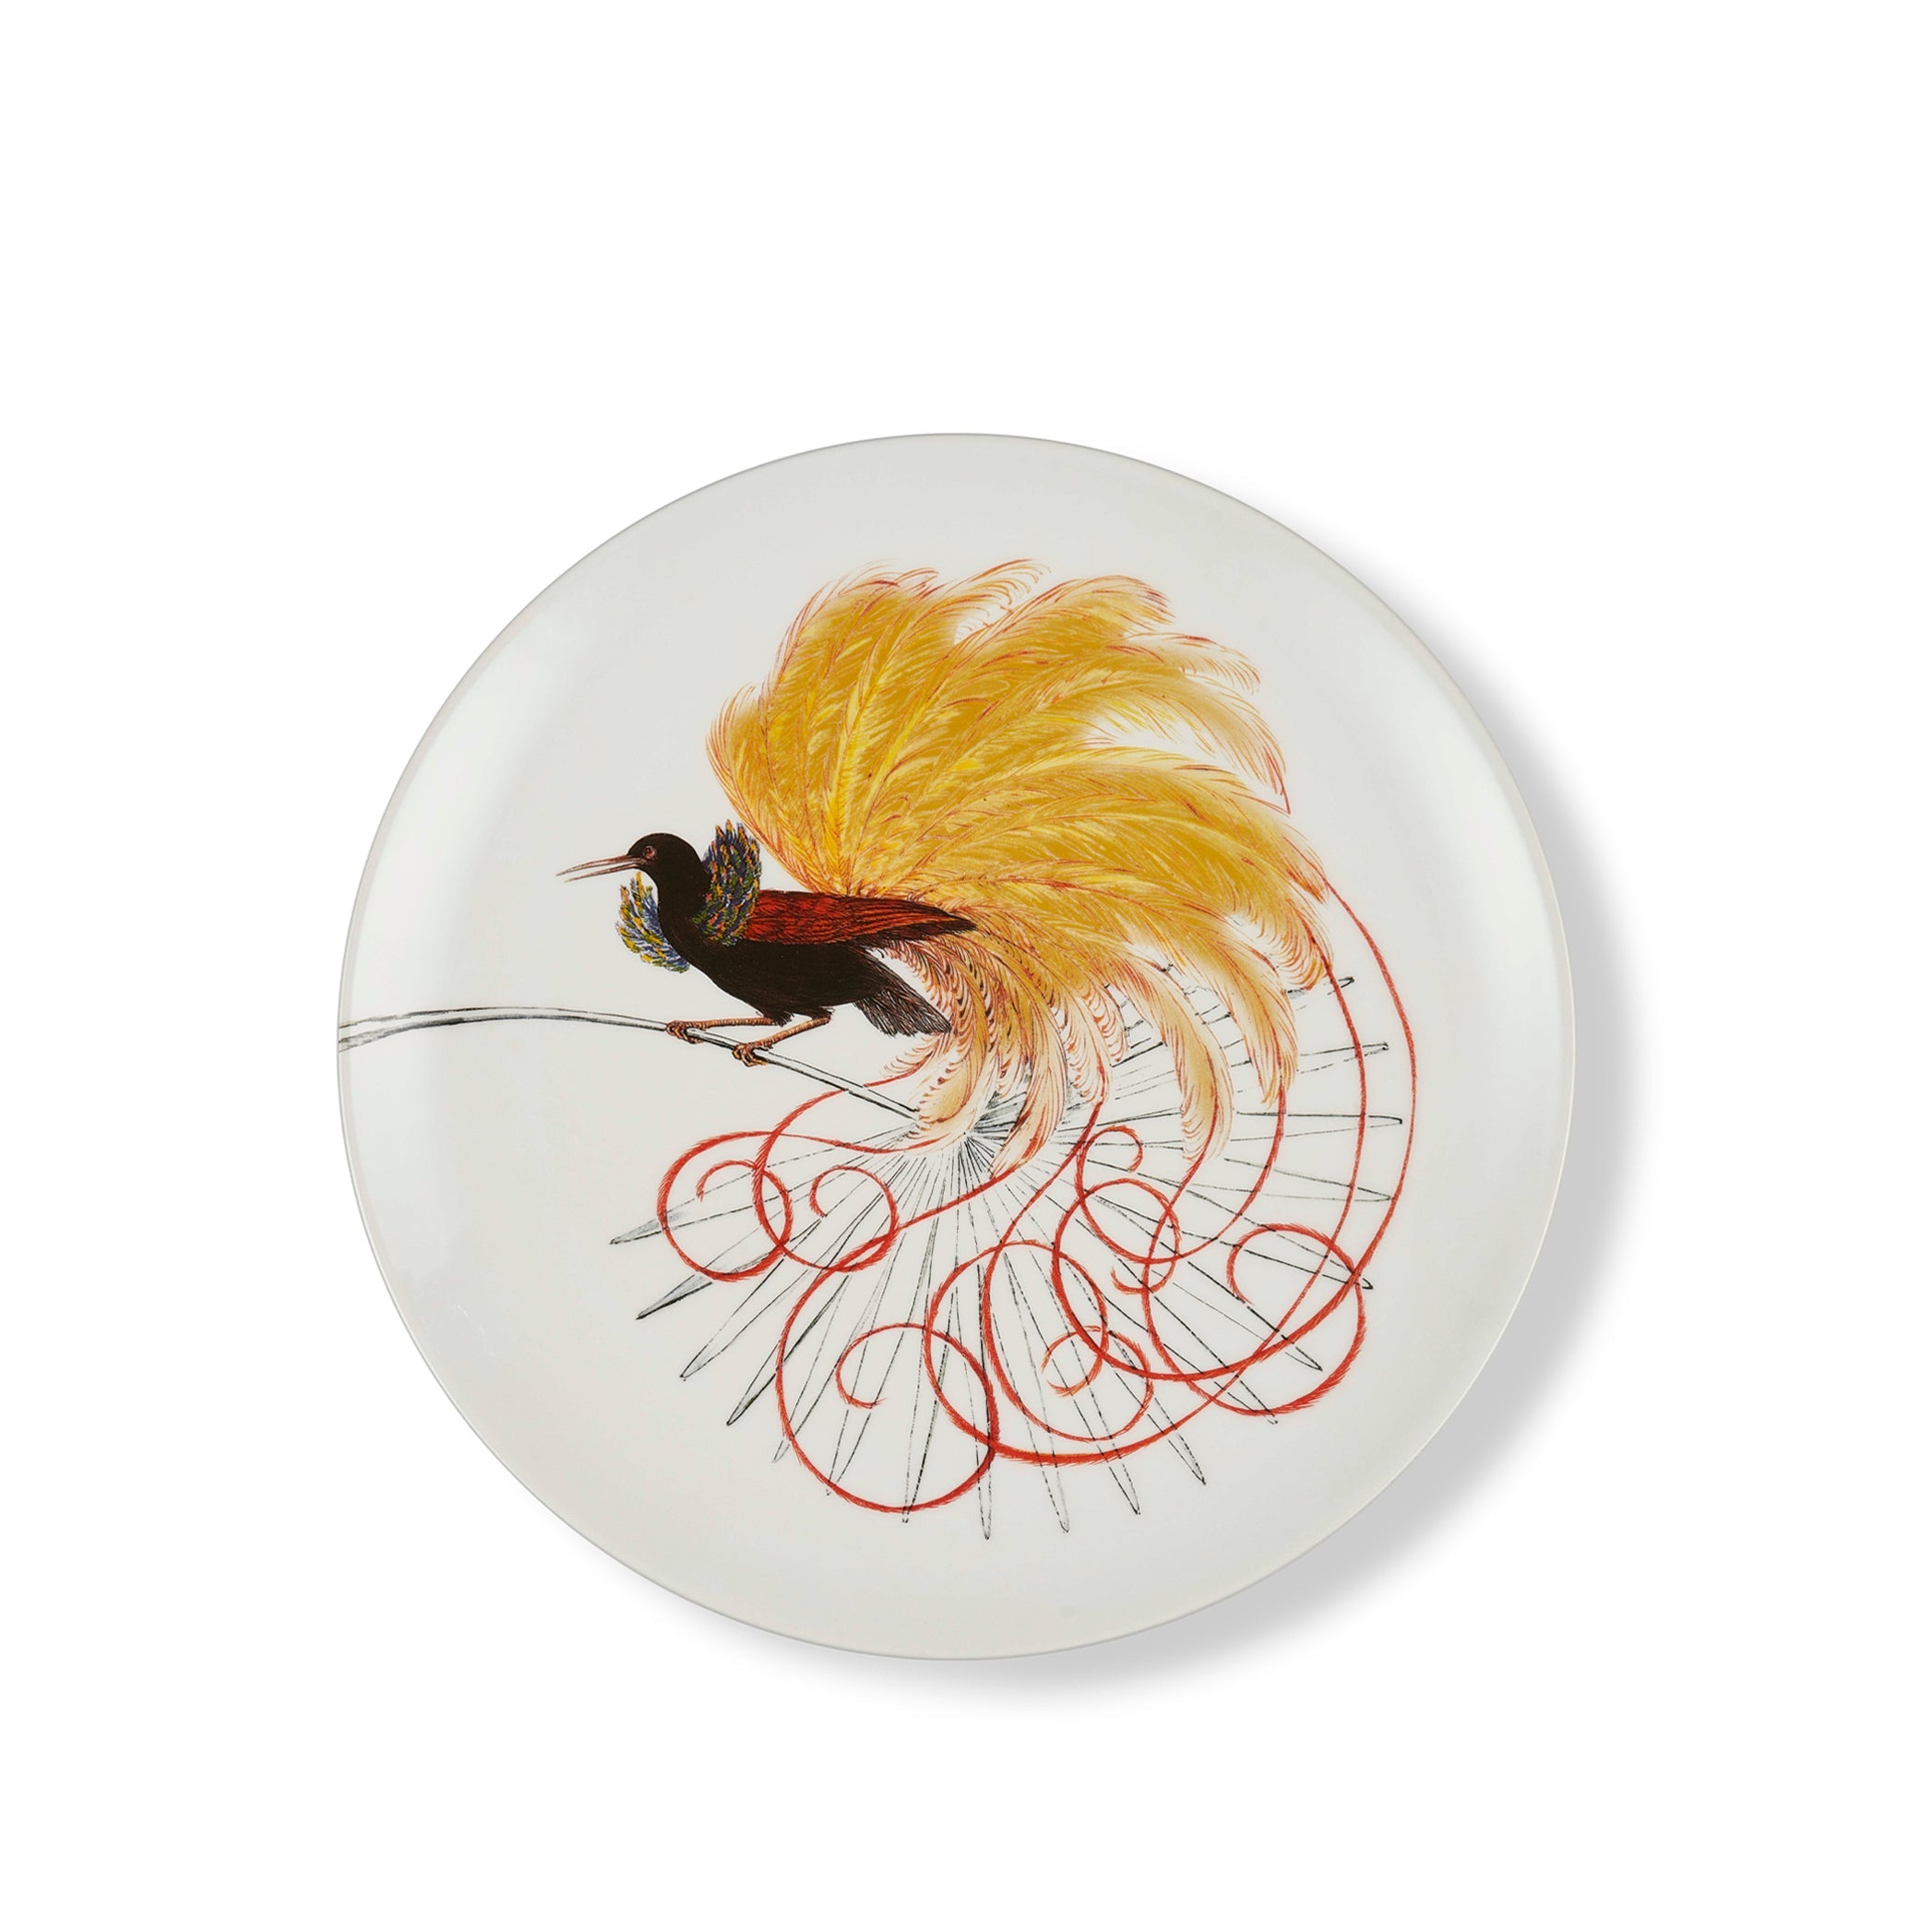 Bird Of Paradise Dinner Plate in White With Yellow & Black Bird, 25cm